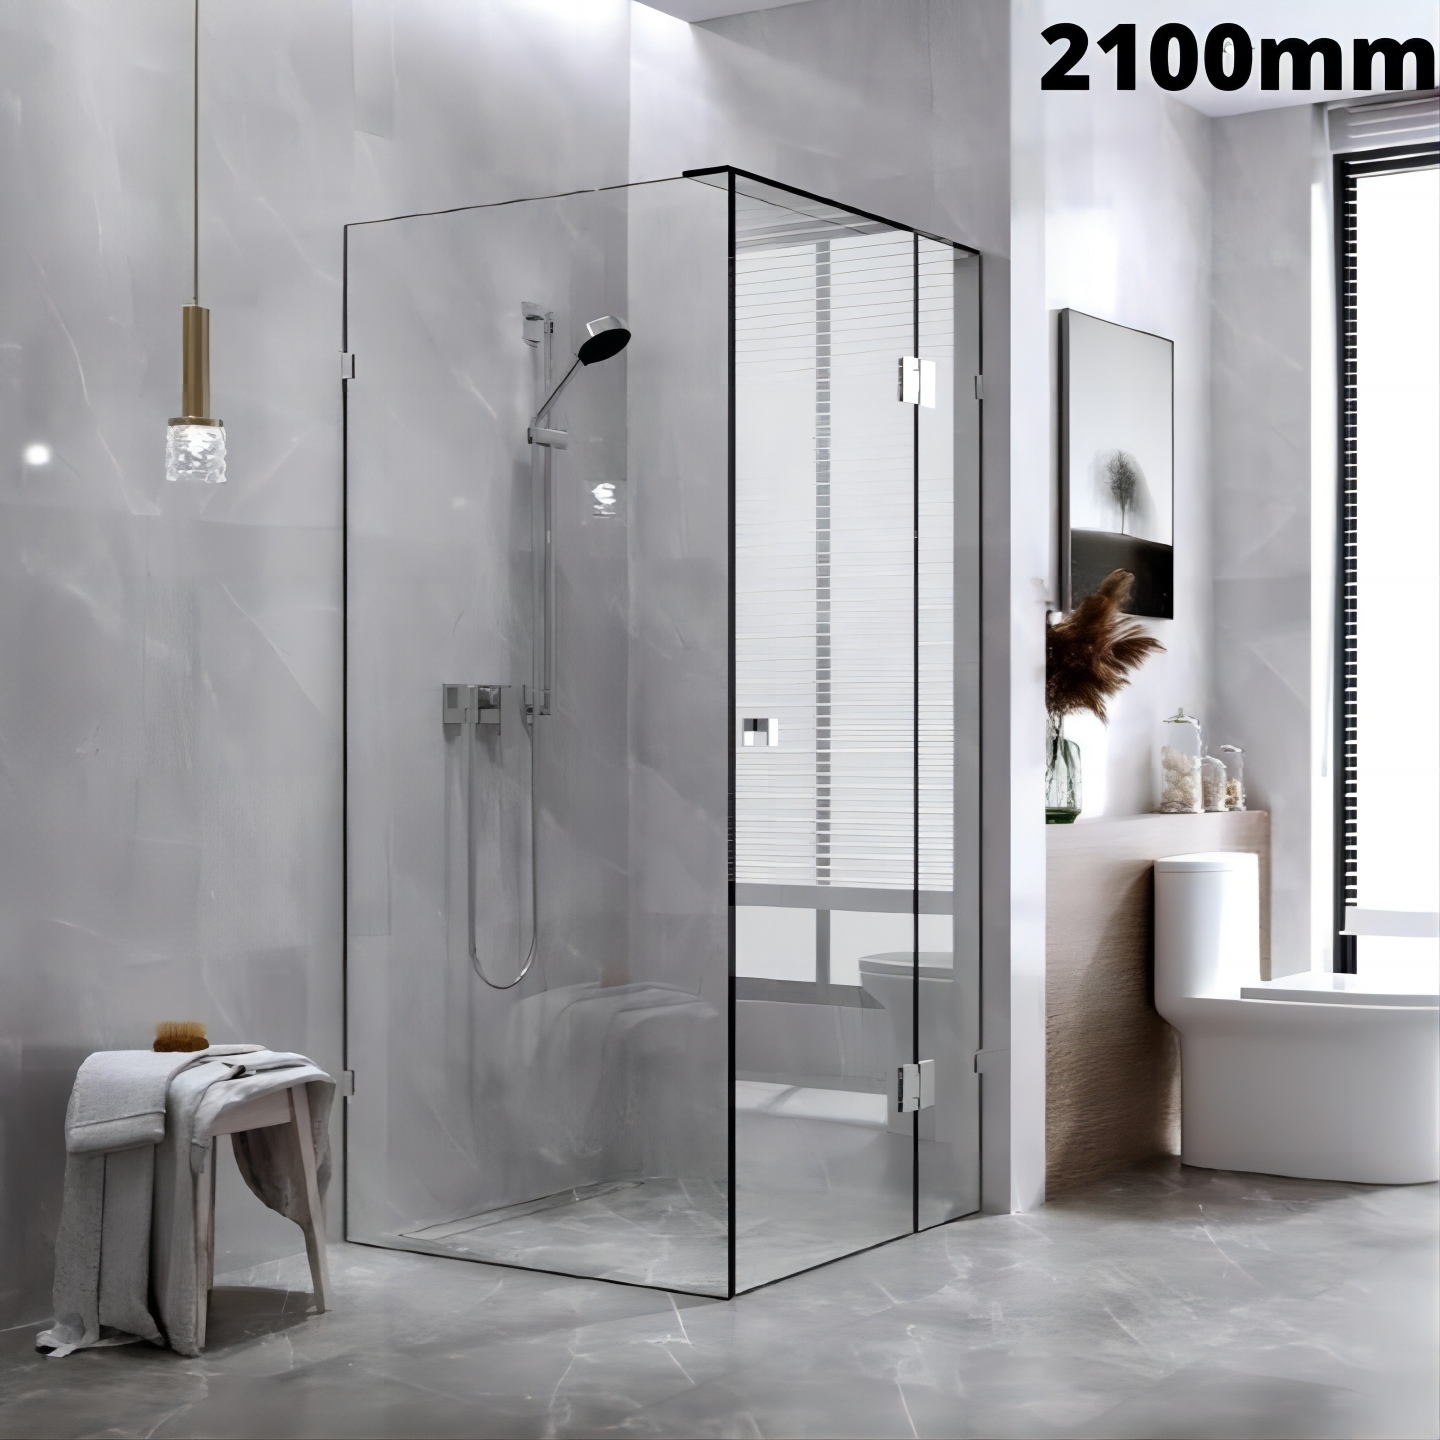 Melbourne 10mm Glass Shower Screen - Free Delivery in Melbourne Metro